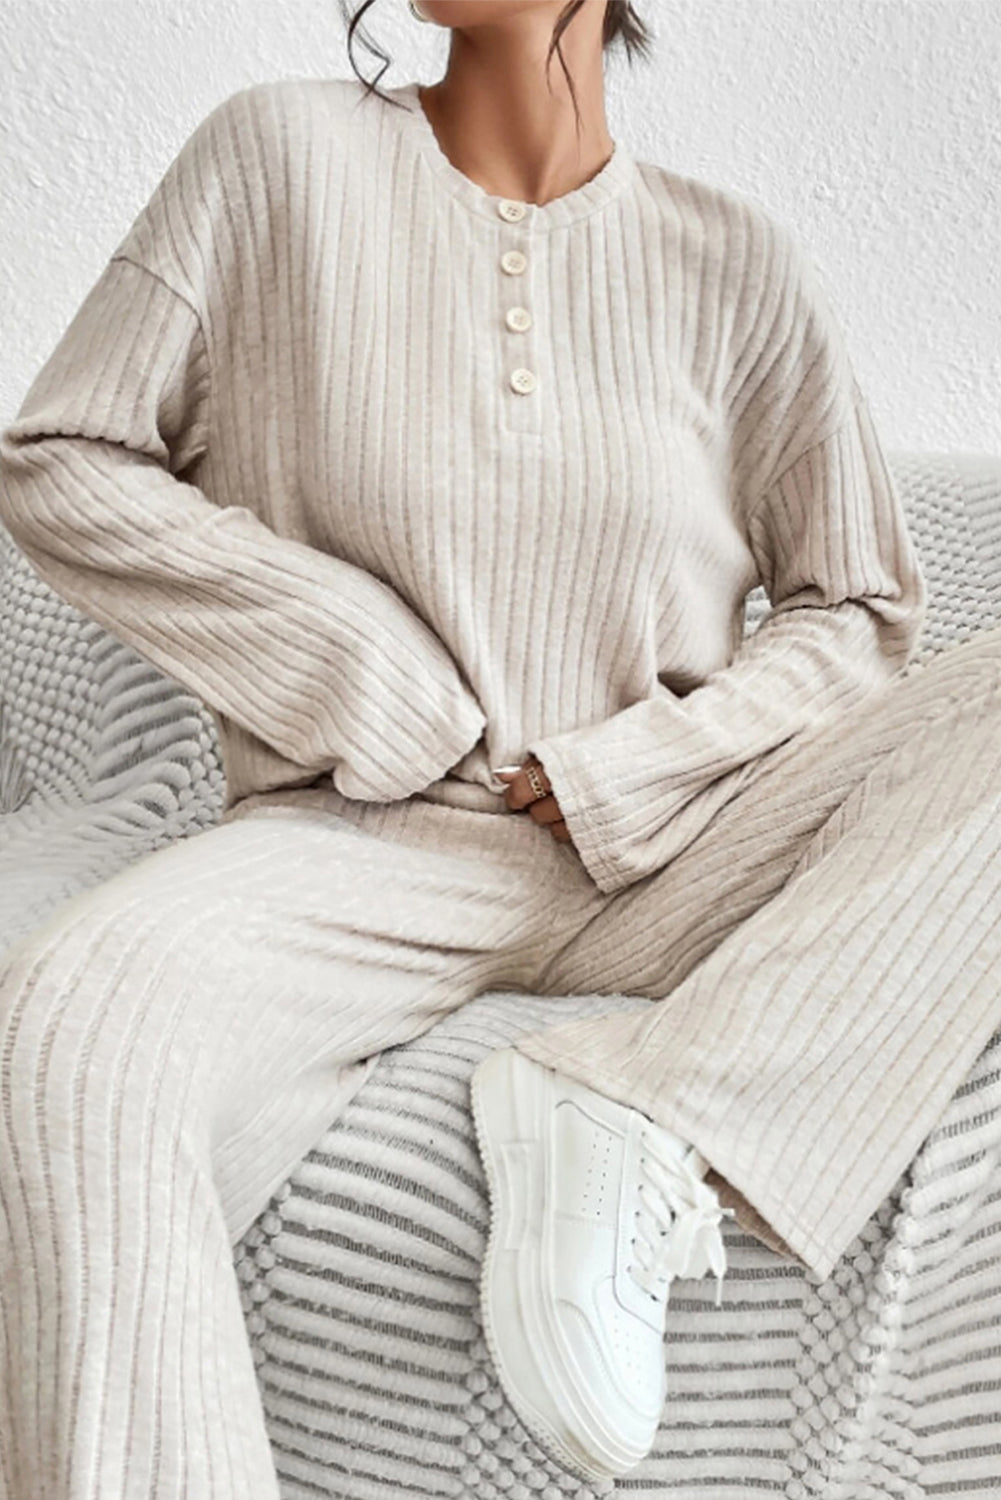 - Ribbed Knit V Neck Slouchy Two-piece Outfit - pants or short set various colors - women's pants set at TFC&H Co.